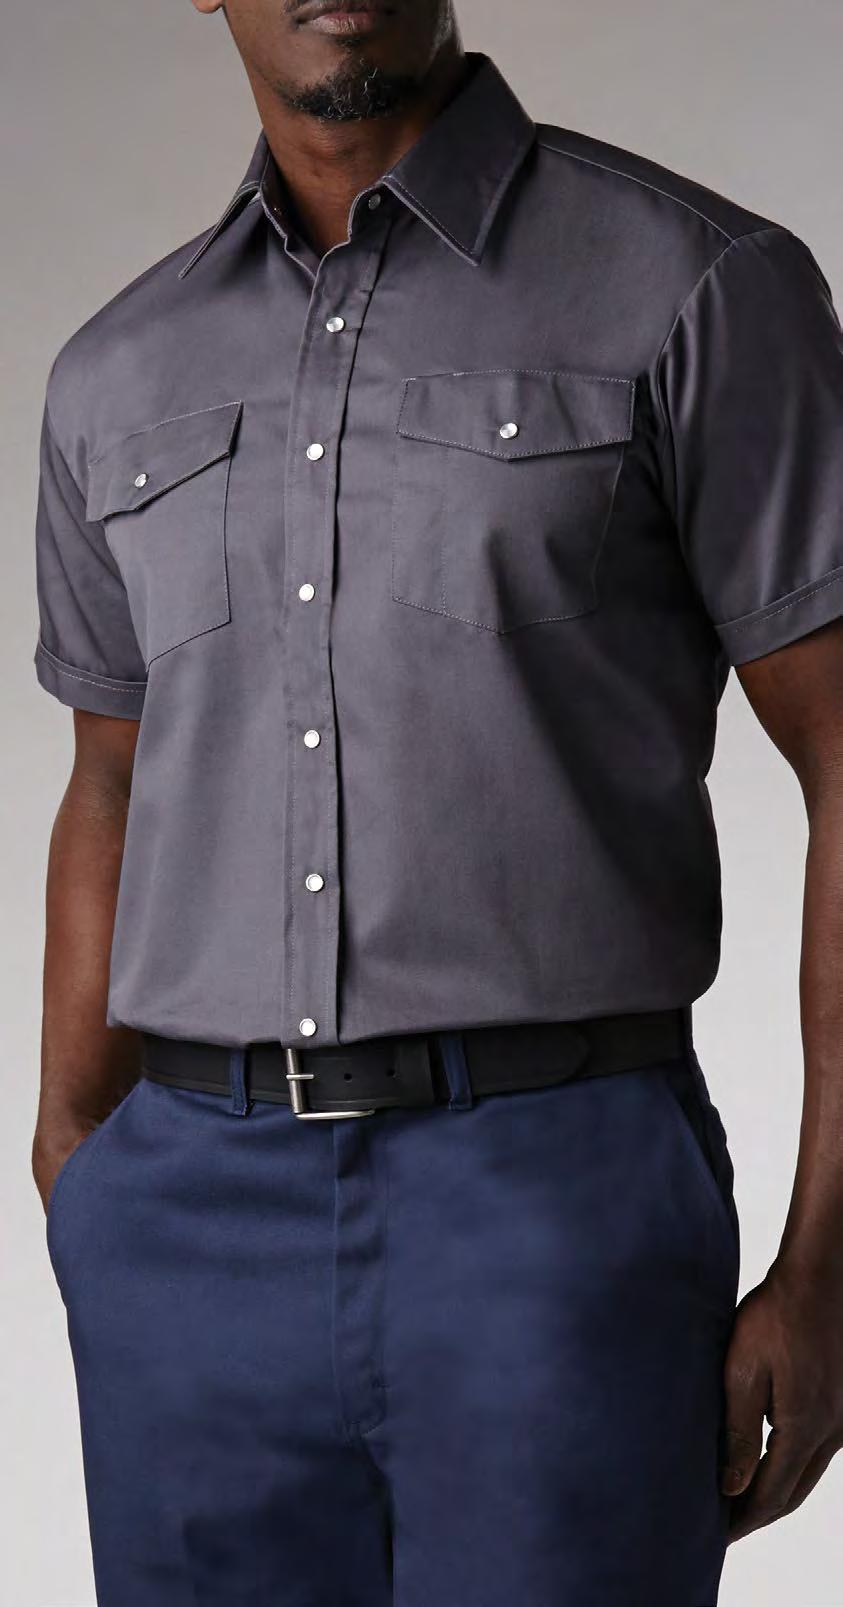 M E N S SHIRTS SHORT SLEEVE SNAP FRONT WORK SHIRT Heavyweight 6 oz. 65% polyester/35% cotton twill. Seams use polyester core wrapped thread that won t shrink and cause puckering.